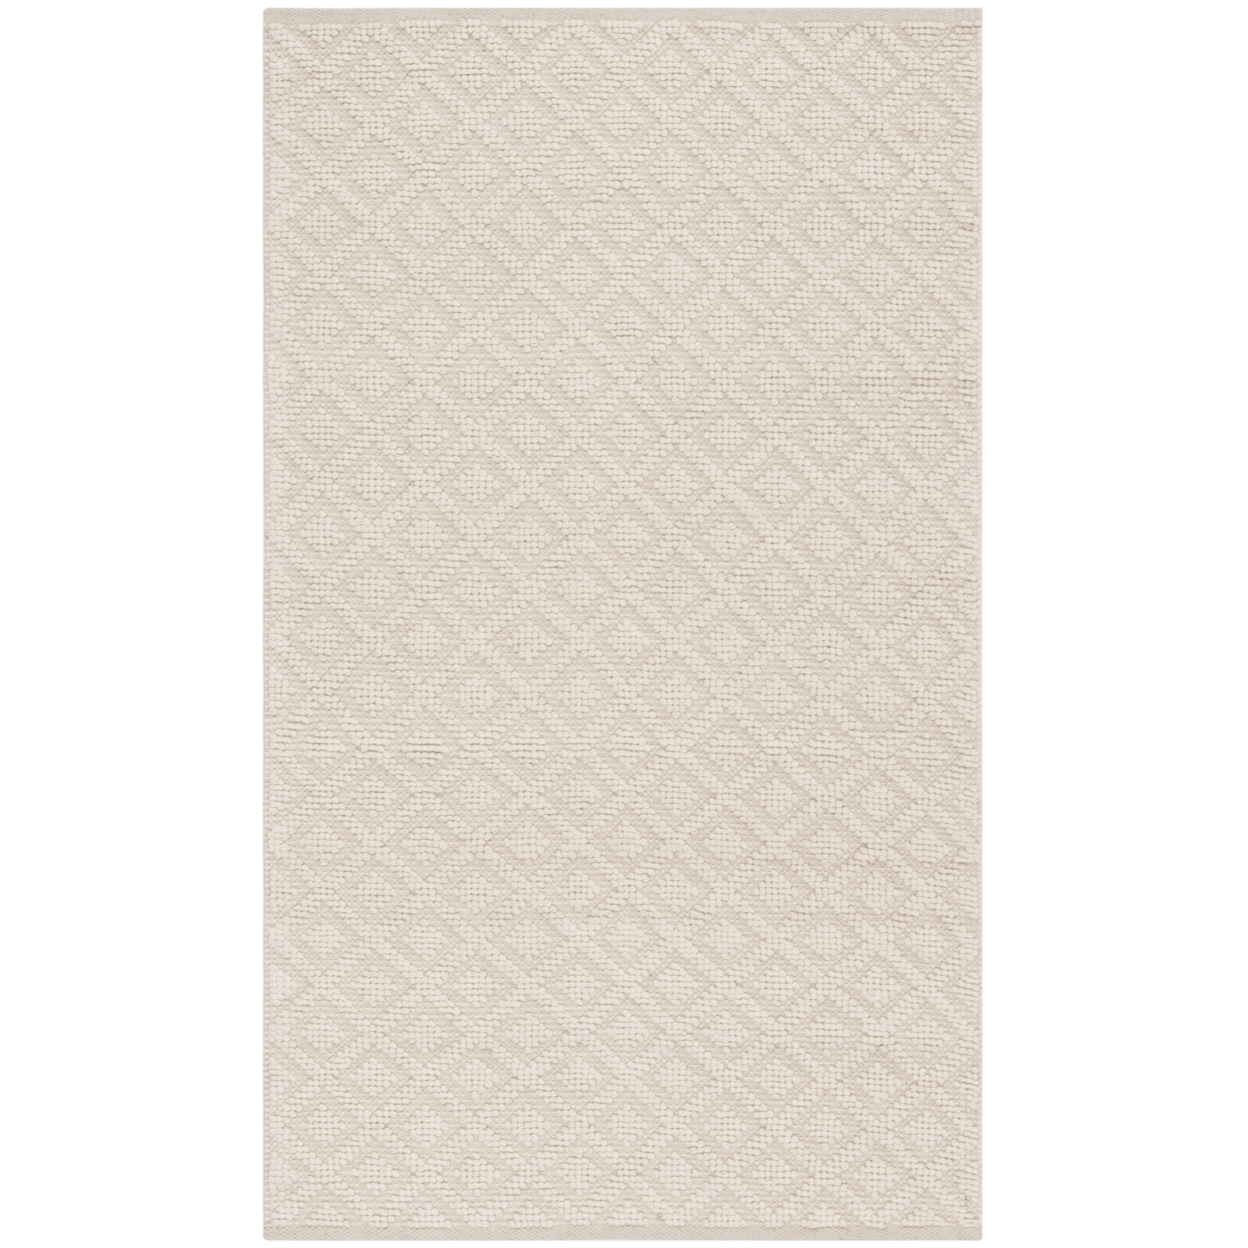 SAFAVIEH Vermont Collection VRM104A Handwoven Ivory Rug - 8' Square